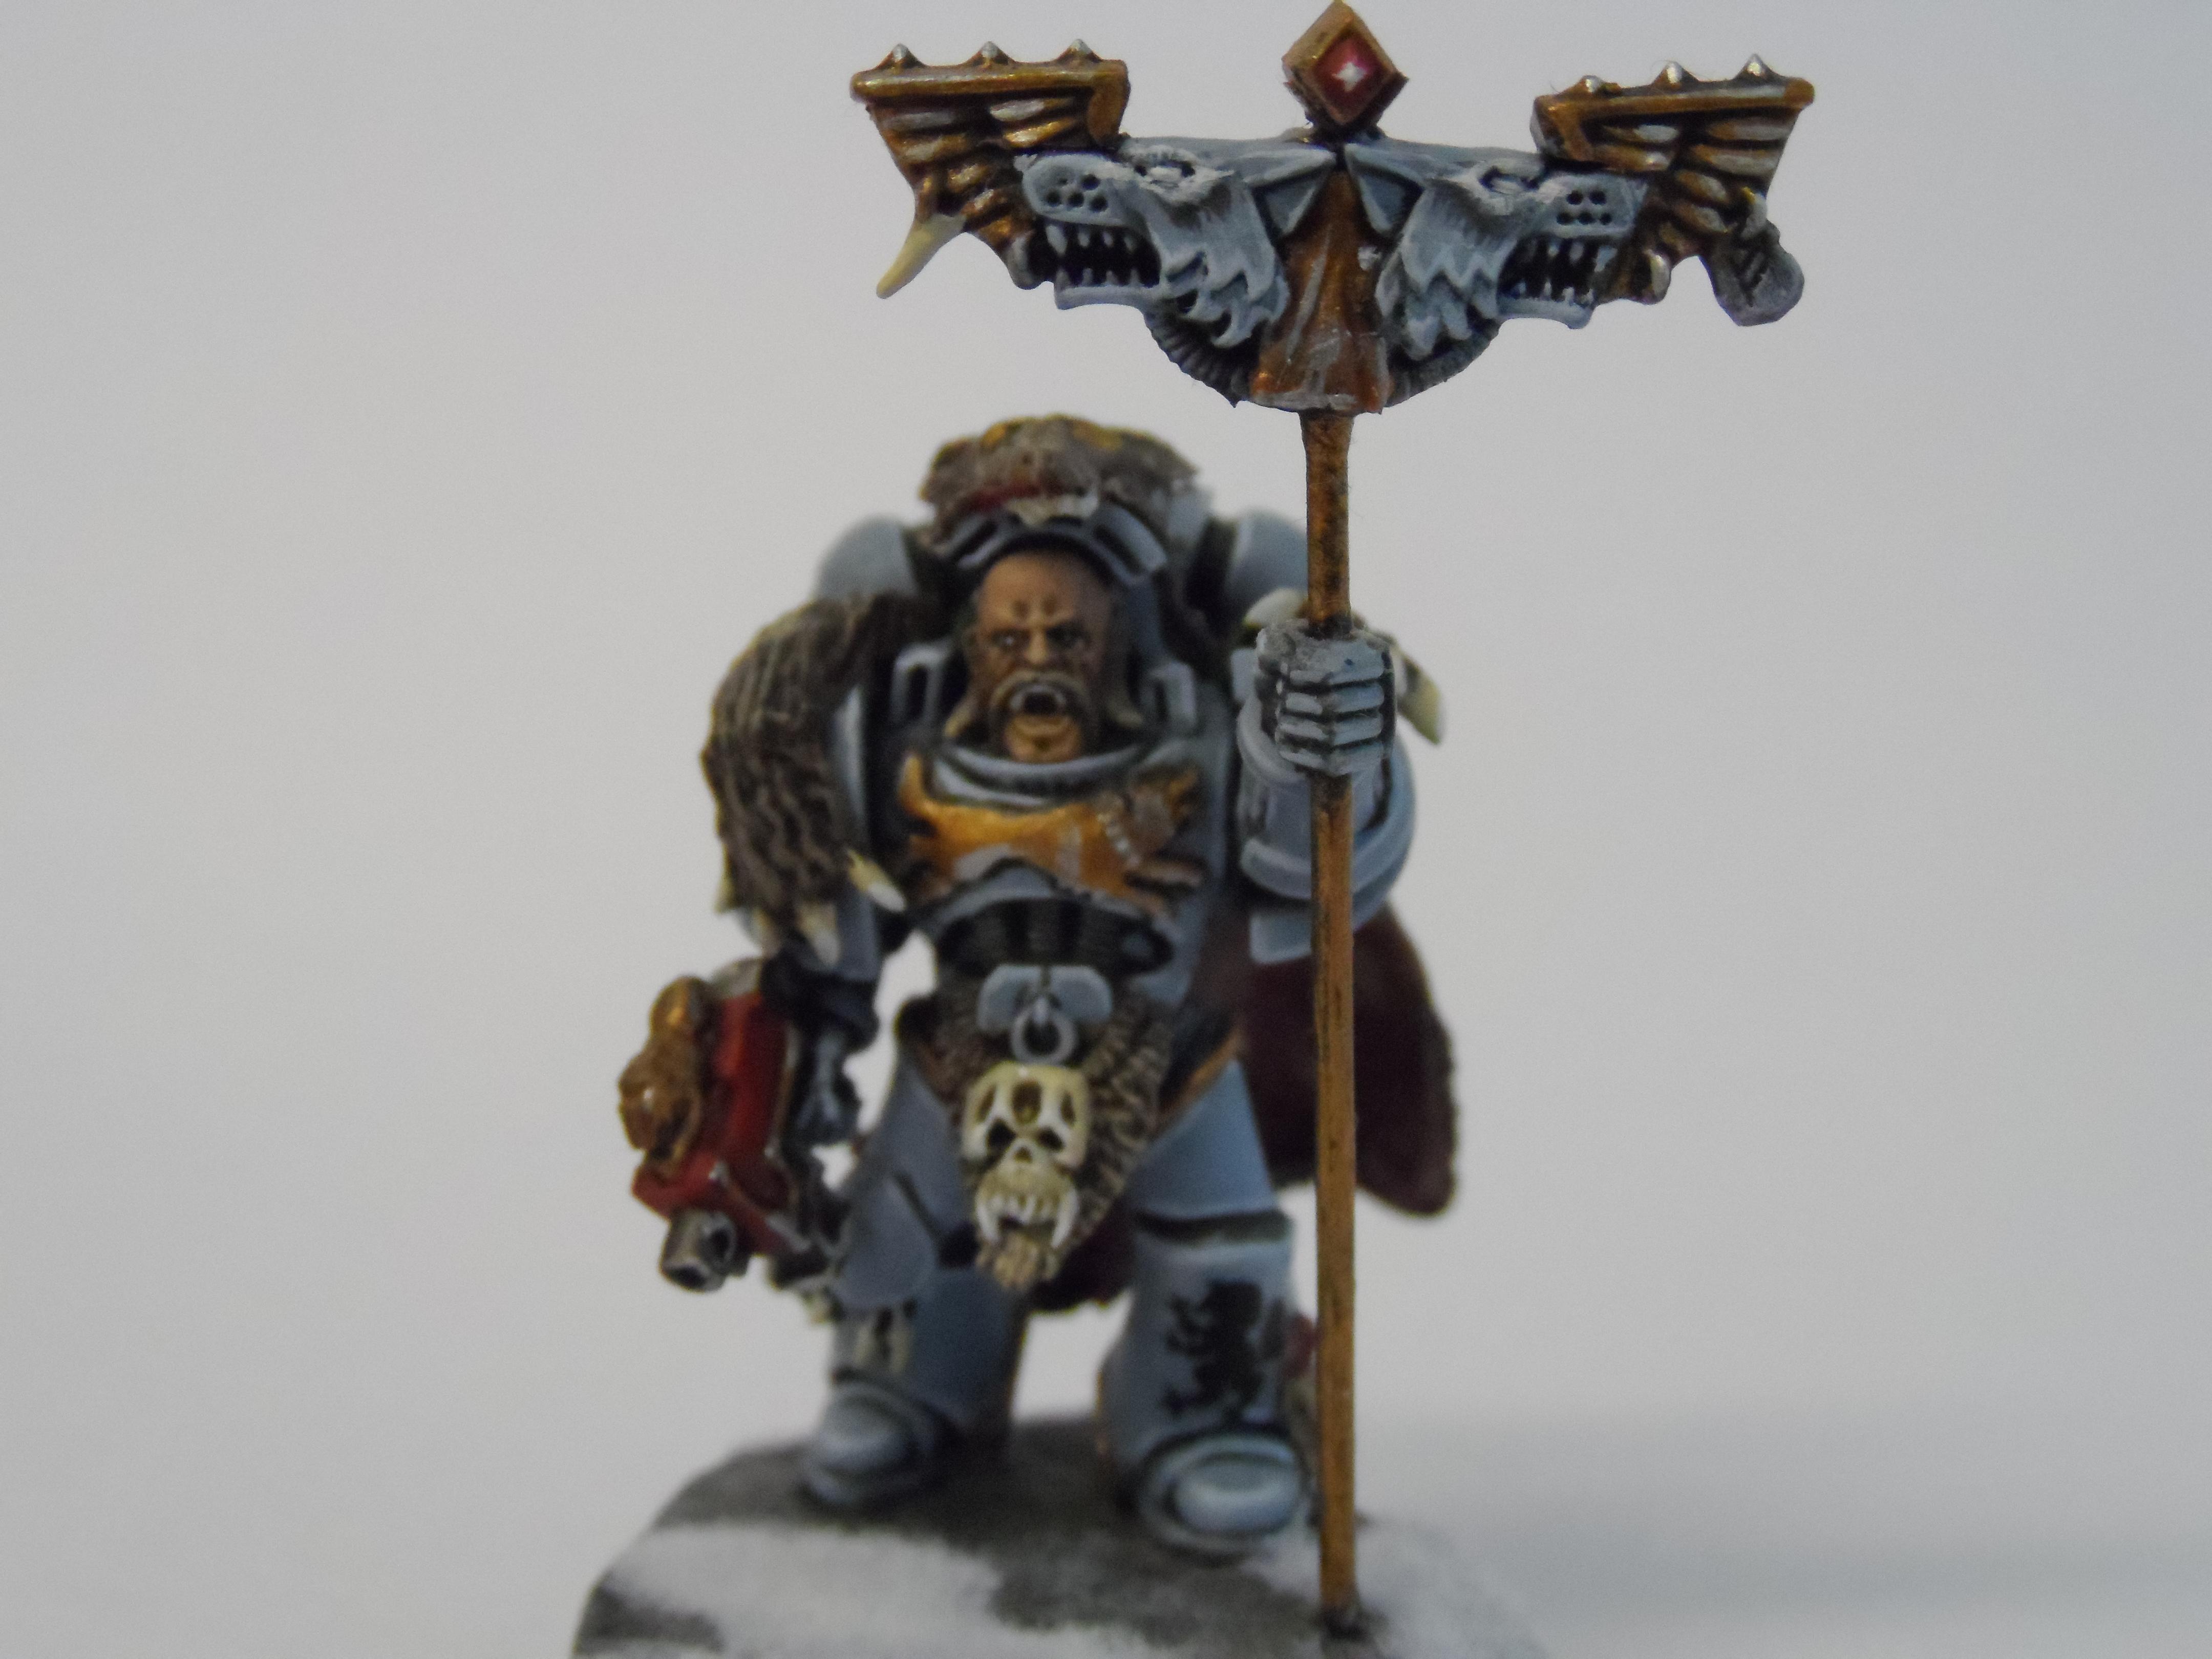 Rune priest based on the pic in the codex